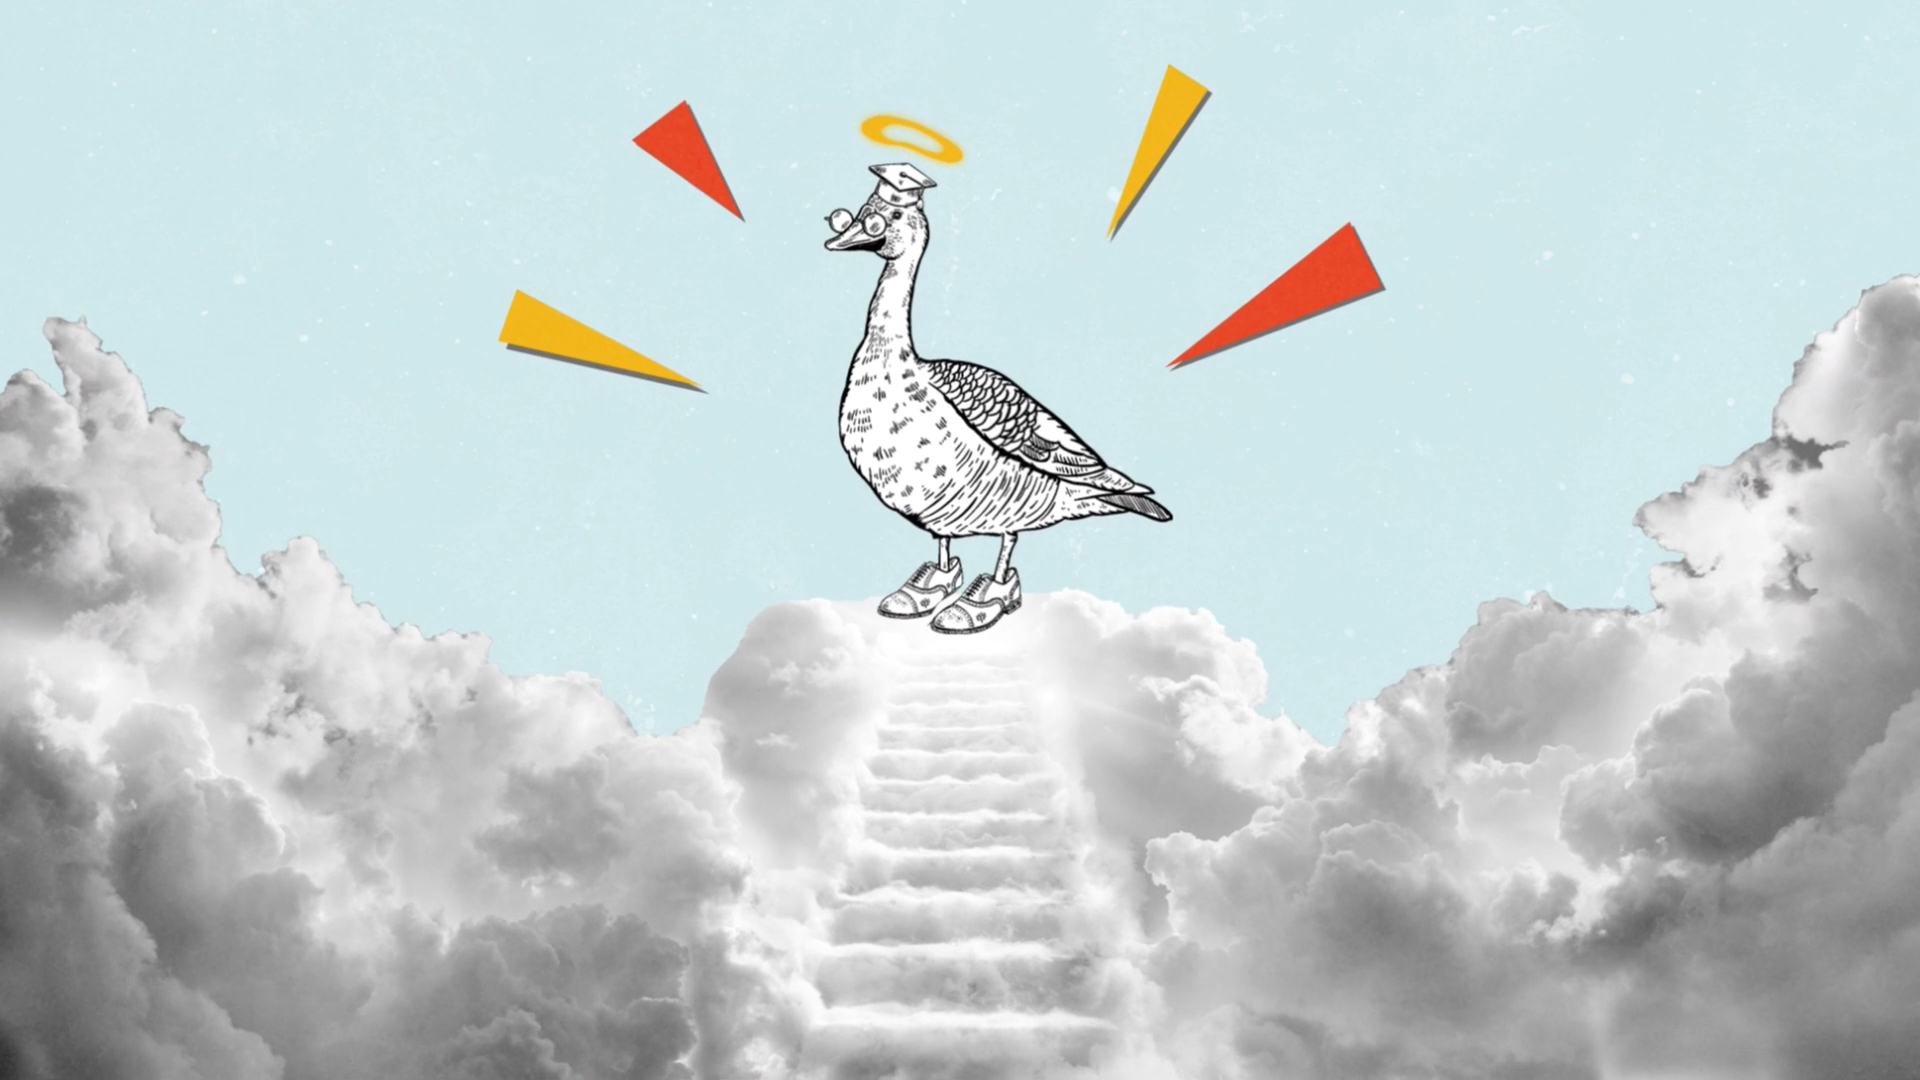 A goose with a halo on its head is standing on top of a staircase in the clouds.